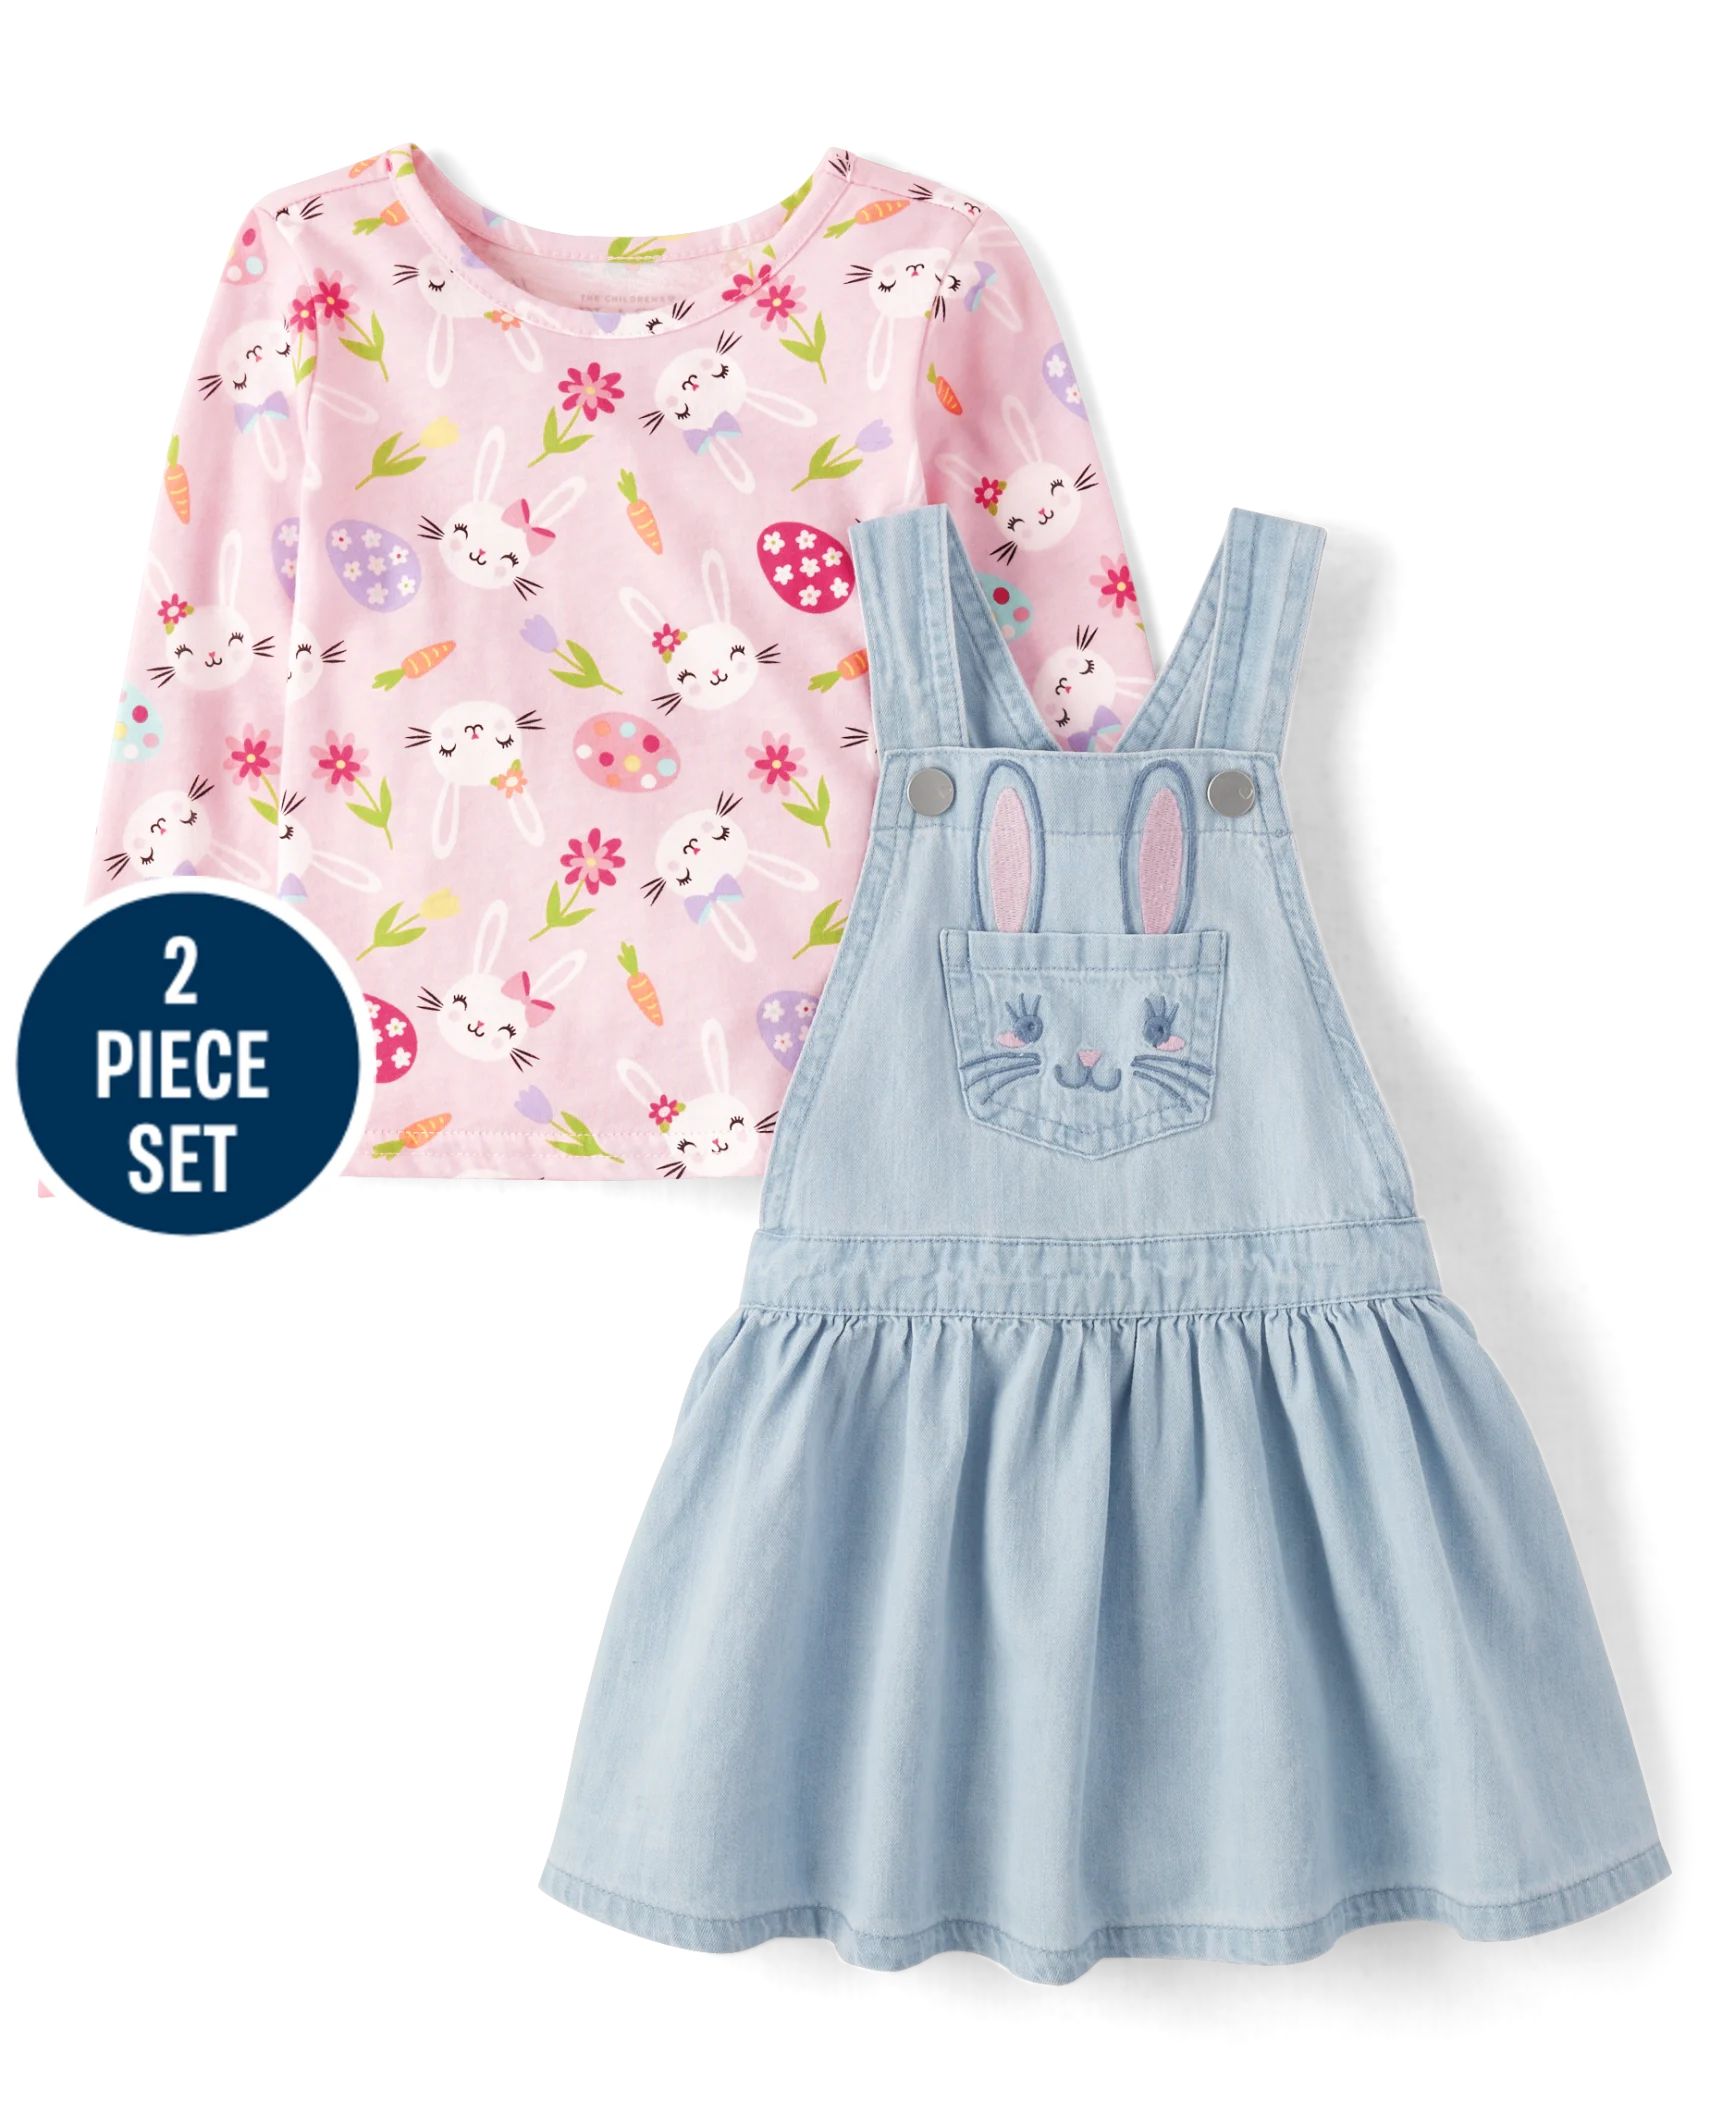 Toddler Girls Long Sleeve Bunny Skirtall 2-Piece Outfit Set | The Children's Place  - BRAMBLE WAS... | The Children's Place